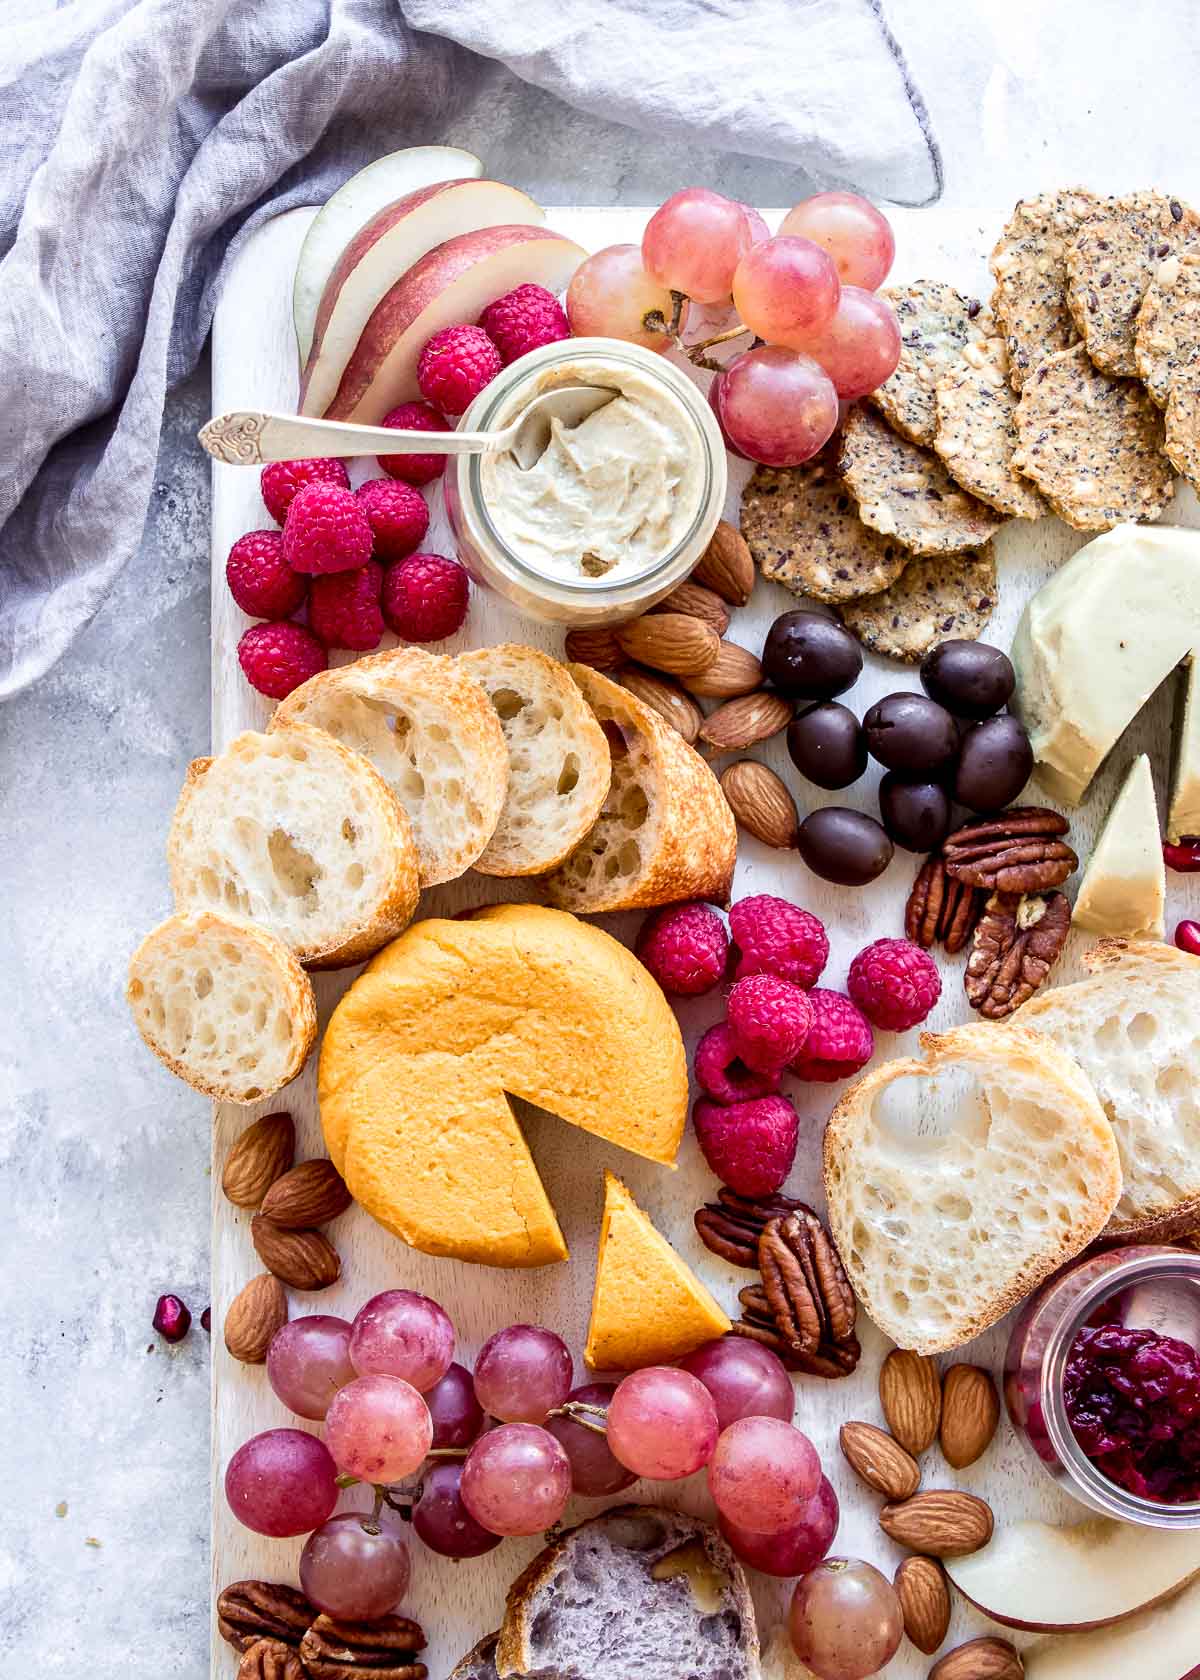 Vegan grazing board showing multiple cheeses, berries, bread, nuts and crackers.